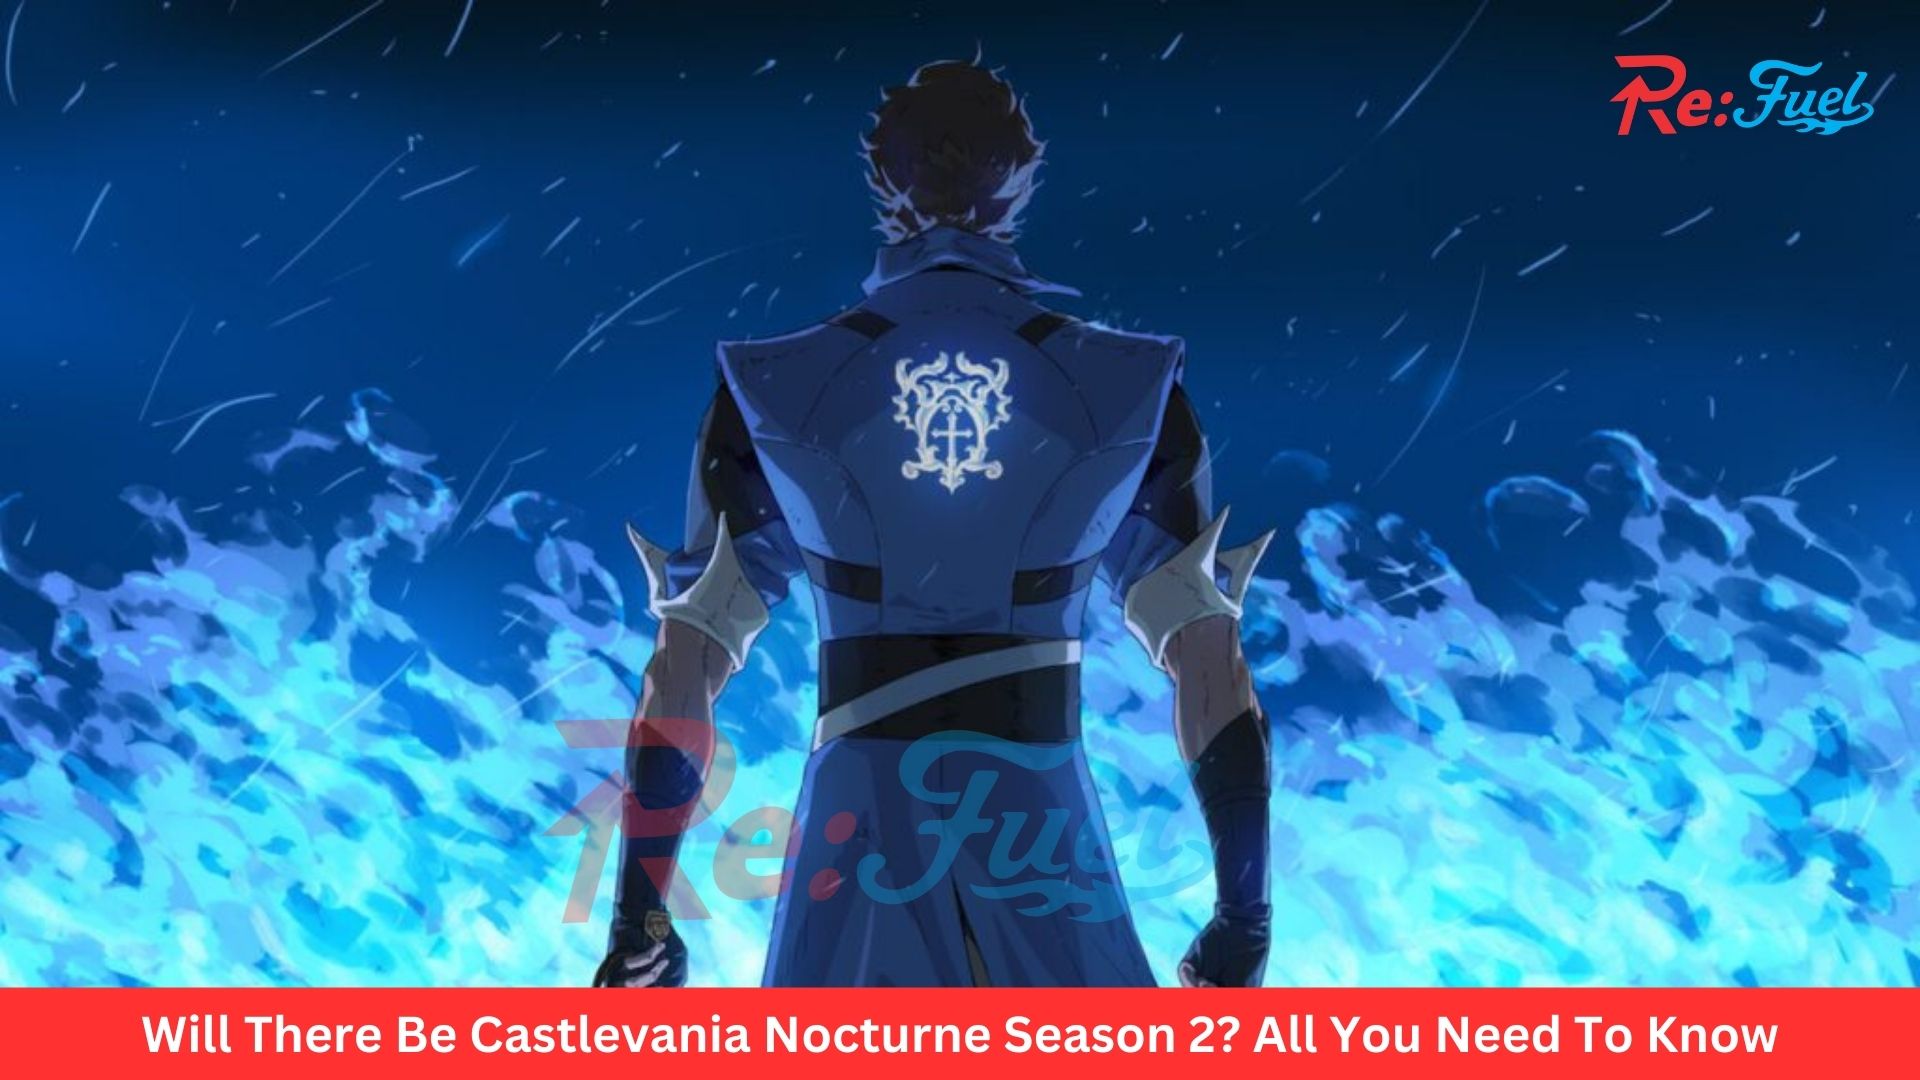 Will There Be Castlevania Nocturne Season 2? All You Need To Know